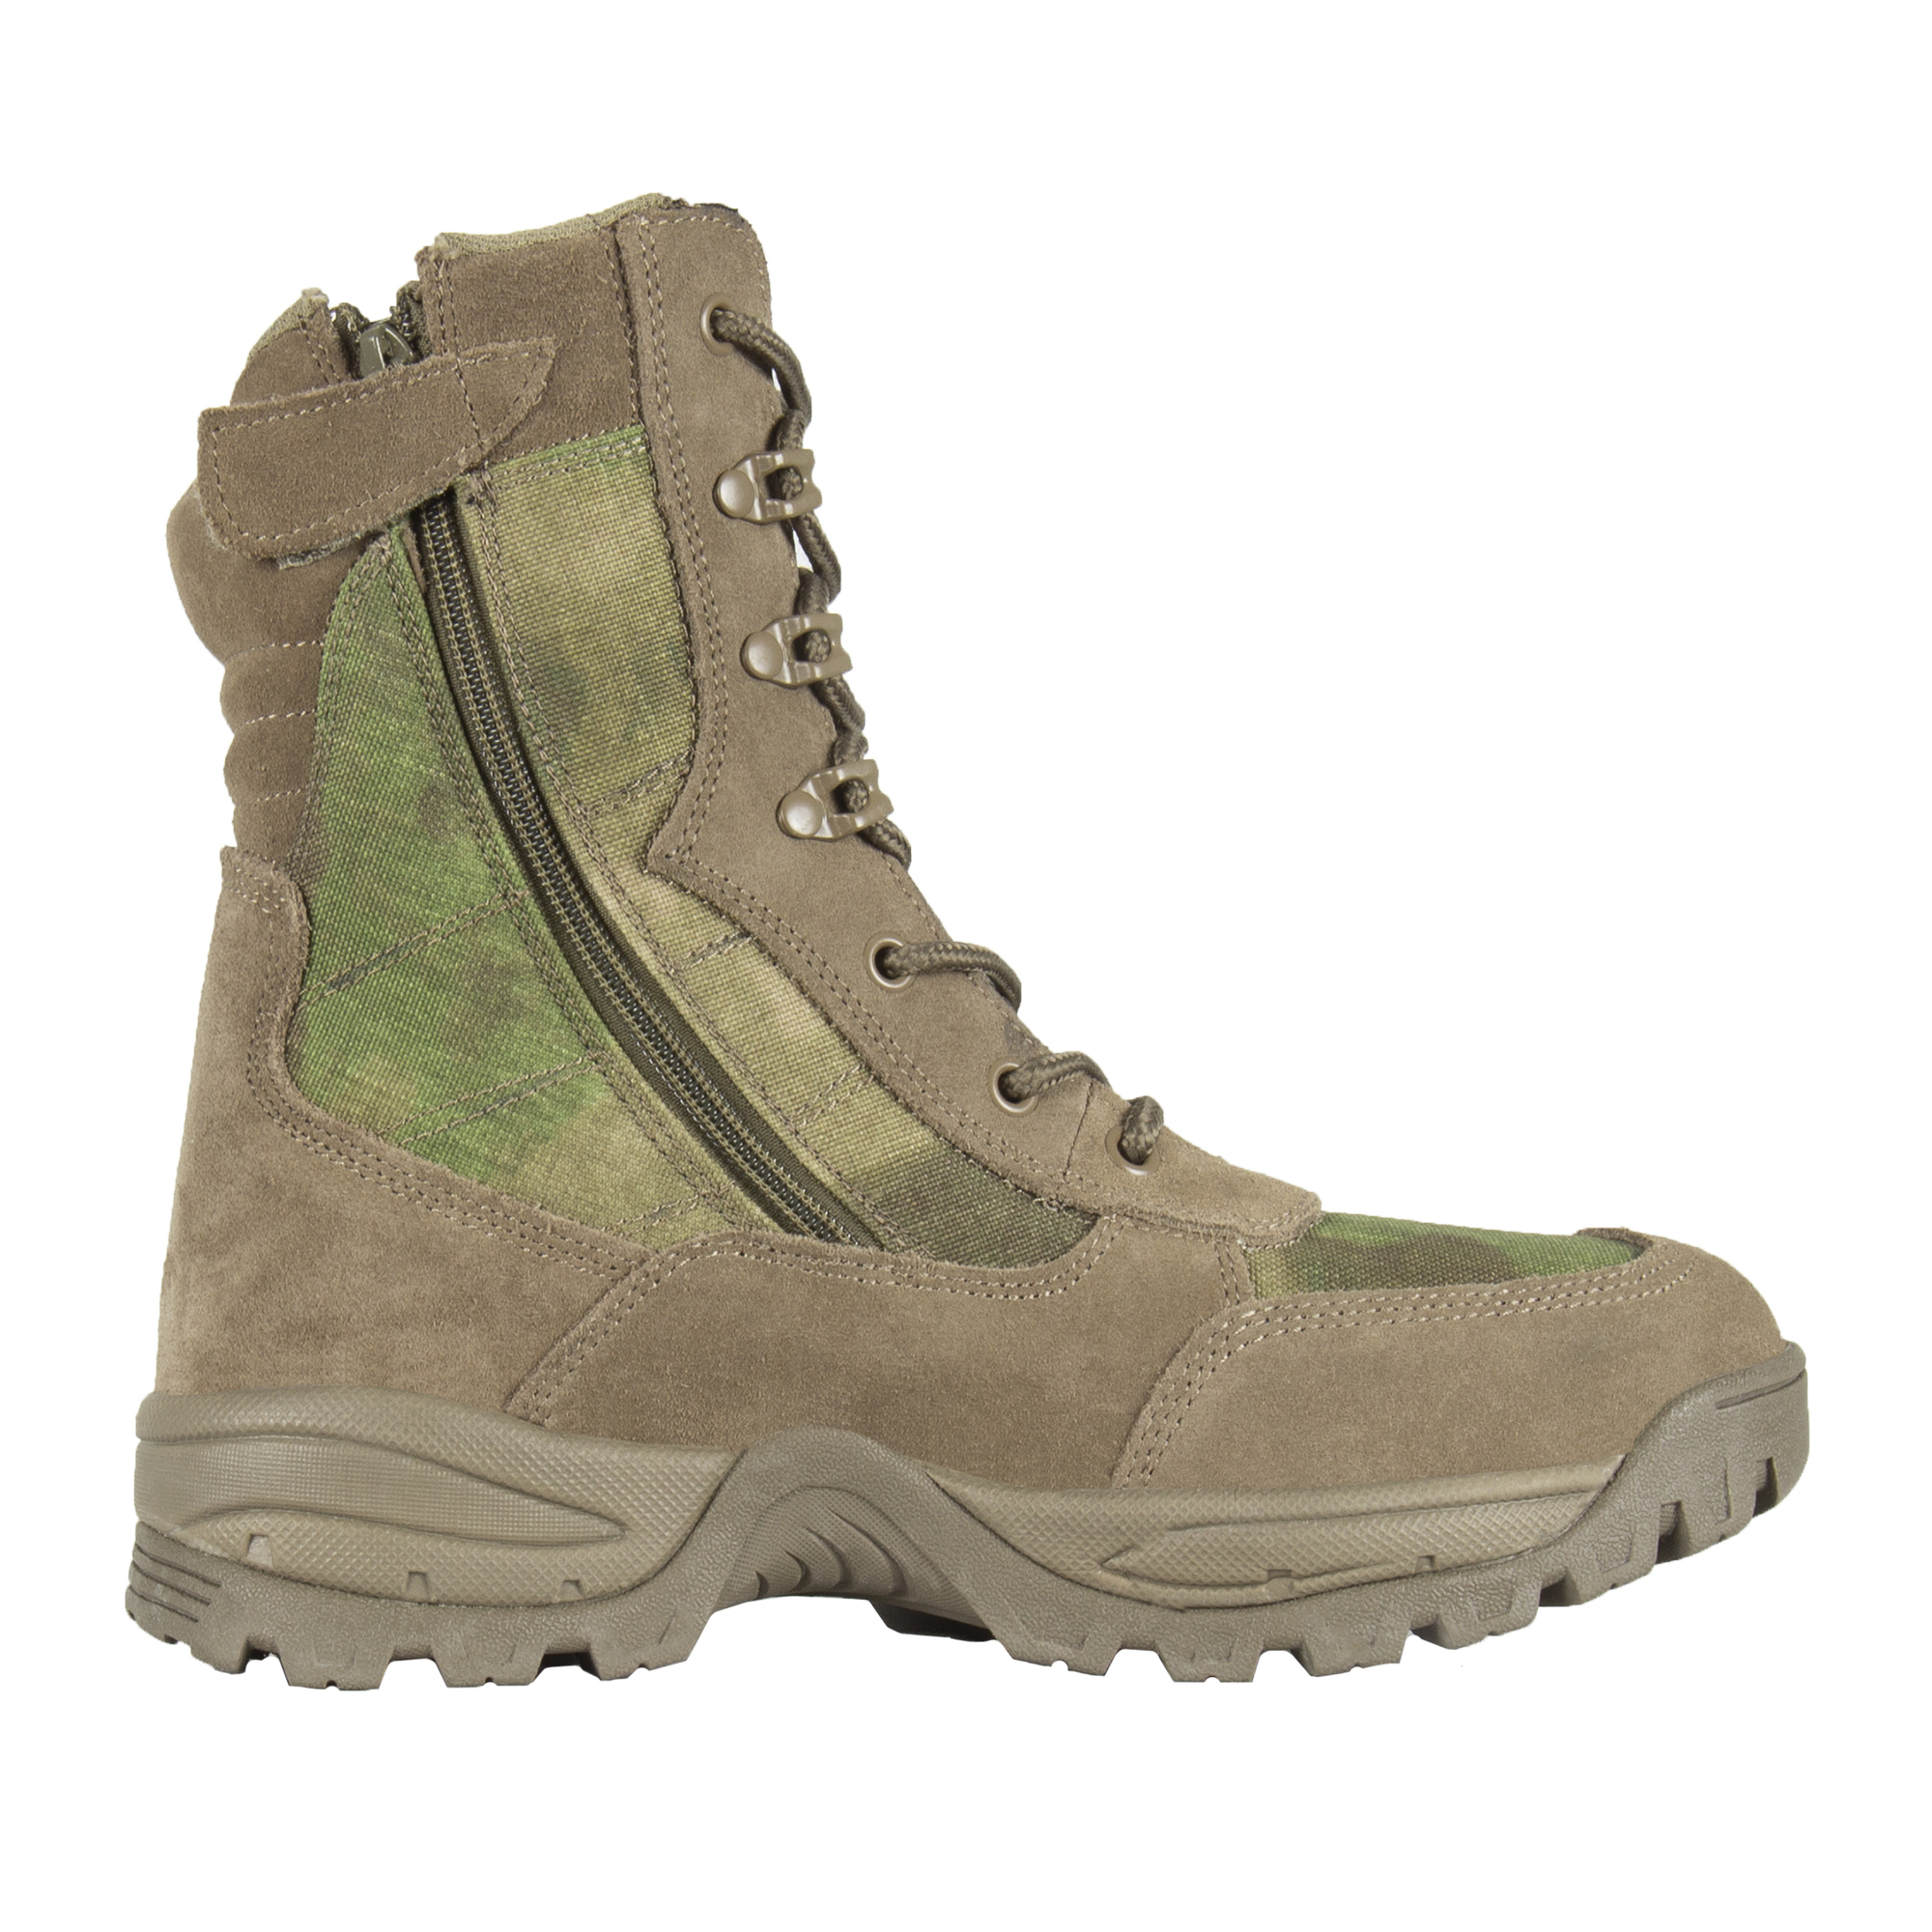 Buy MIL-TEC SECURITY BOOTS (ATACS FG), AFG Camo - 12822159. Price - 111 ...